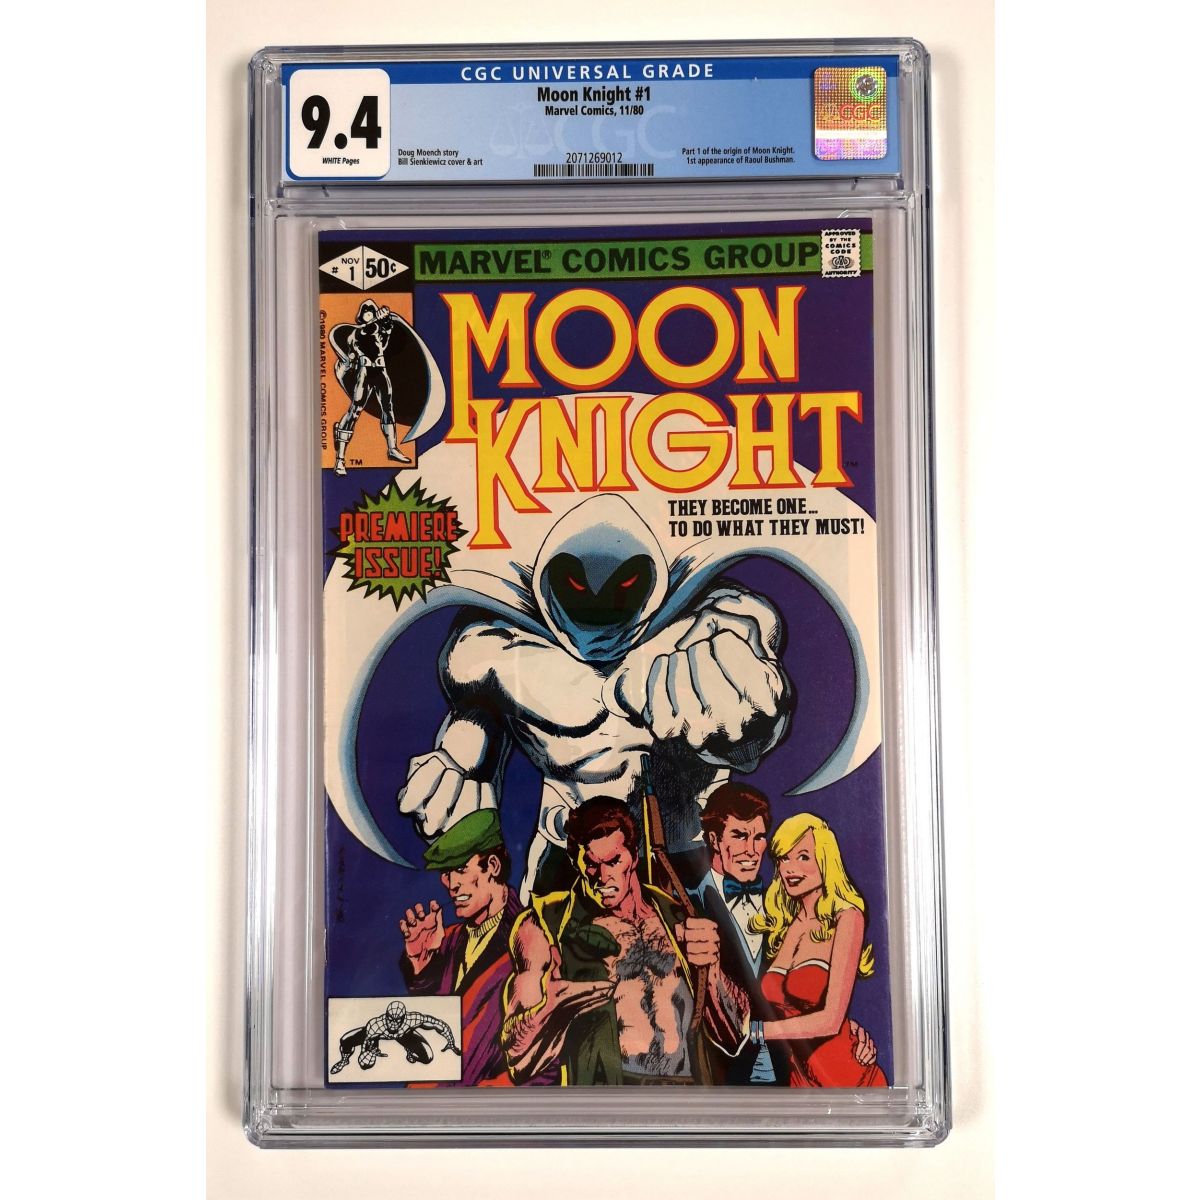 Item Comics - Marvel - Moon Knight N°1 (1980 1st Series) - [CGC 9.4 - White Pages]